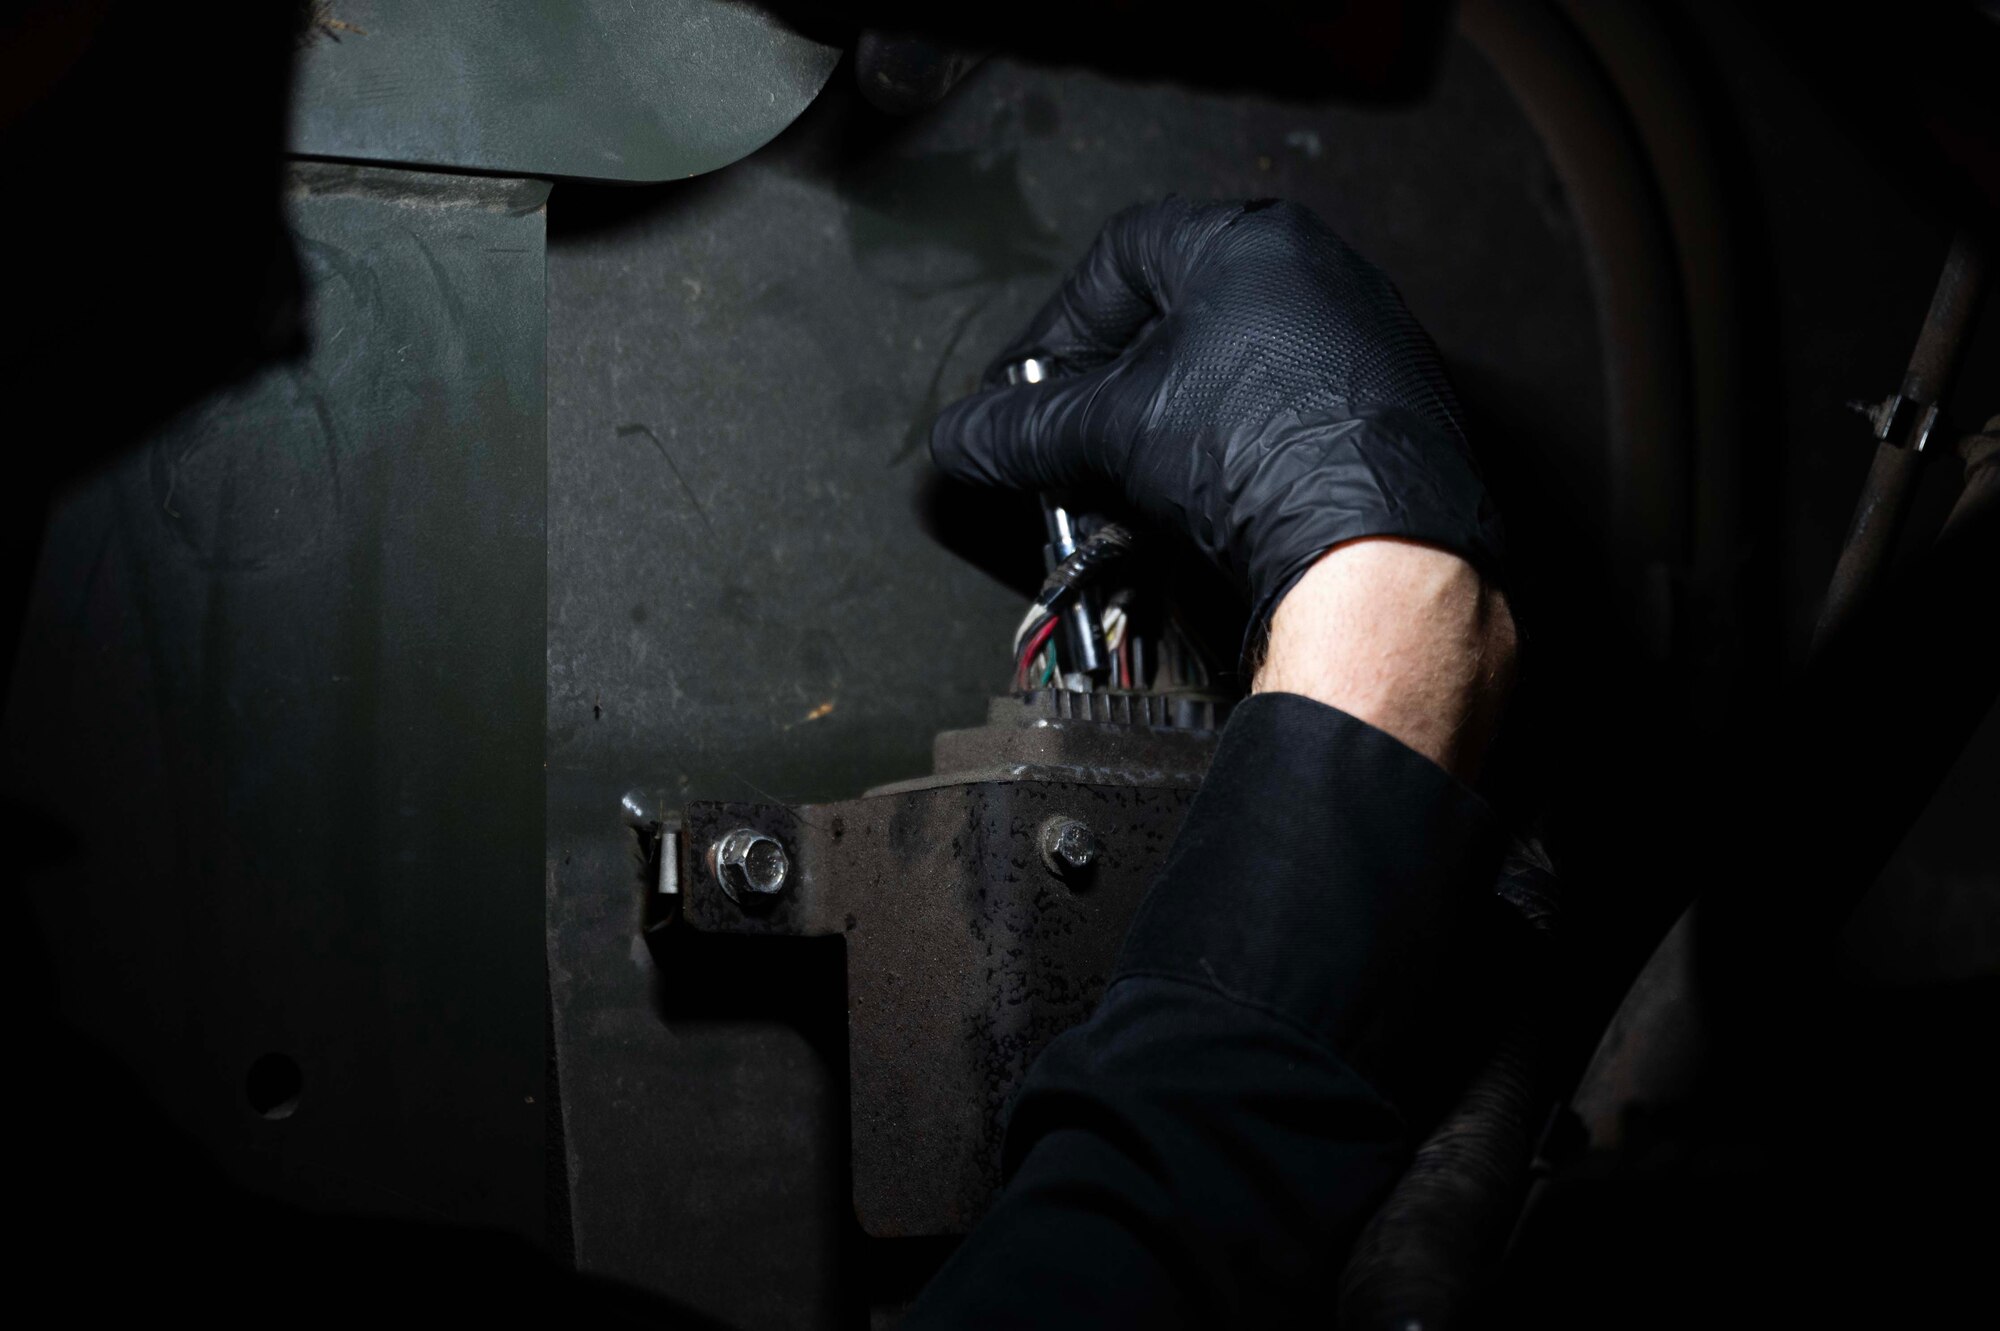 U.S. Air Force Staff Sgt. Daniel Payne, 100th Logistics Readiness Squadron NCO in charge of material handling equipment, repairs an electrical malfunction in a government vehicle at Royal Air Force Mildenhall, England, Jan. 9, 2023. Payne’s job involves scheduling maintenance for government vehicles that aid air transportation. (U.S. Air Force photo by Airman 1st Class Viviam Chiu)